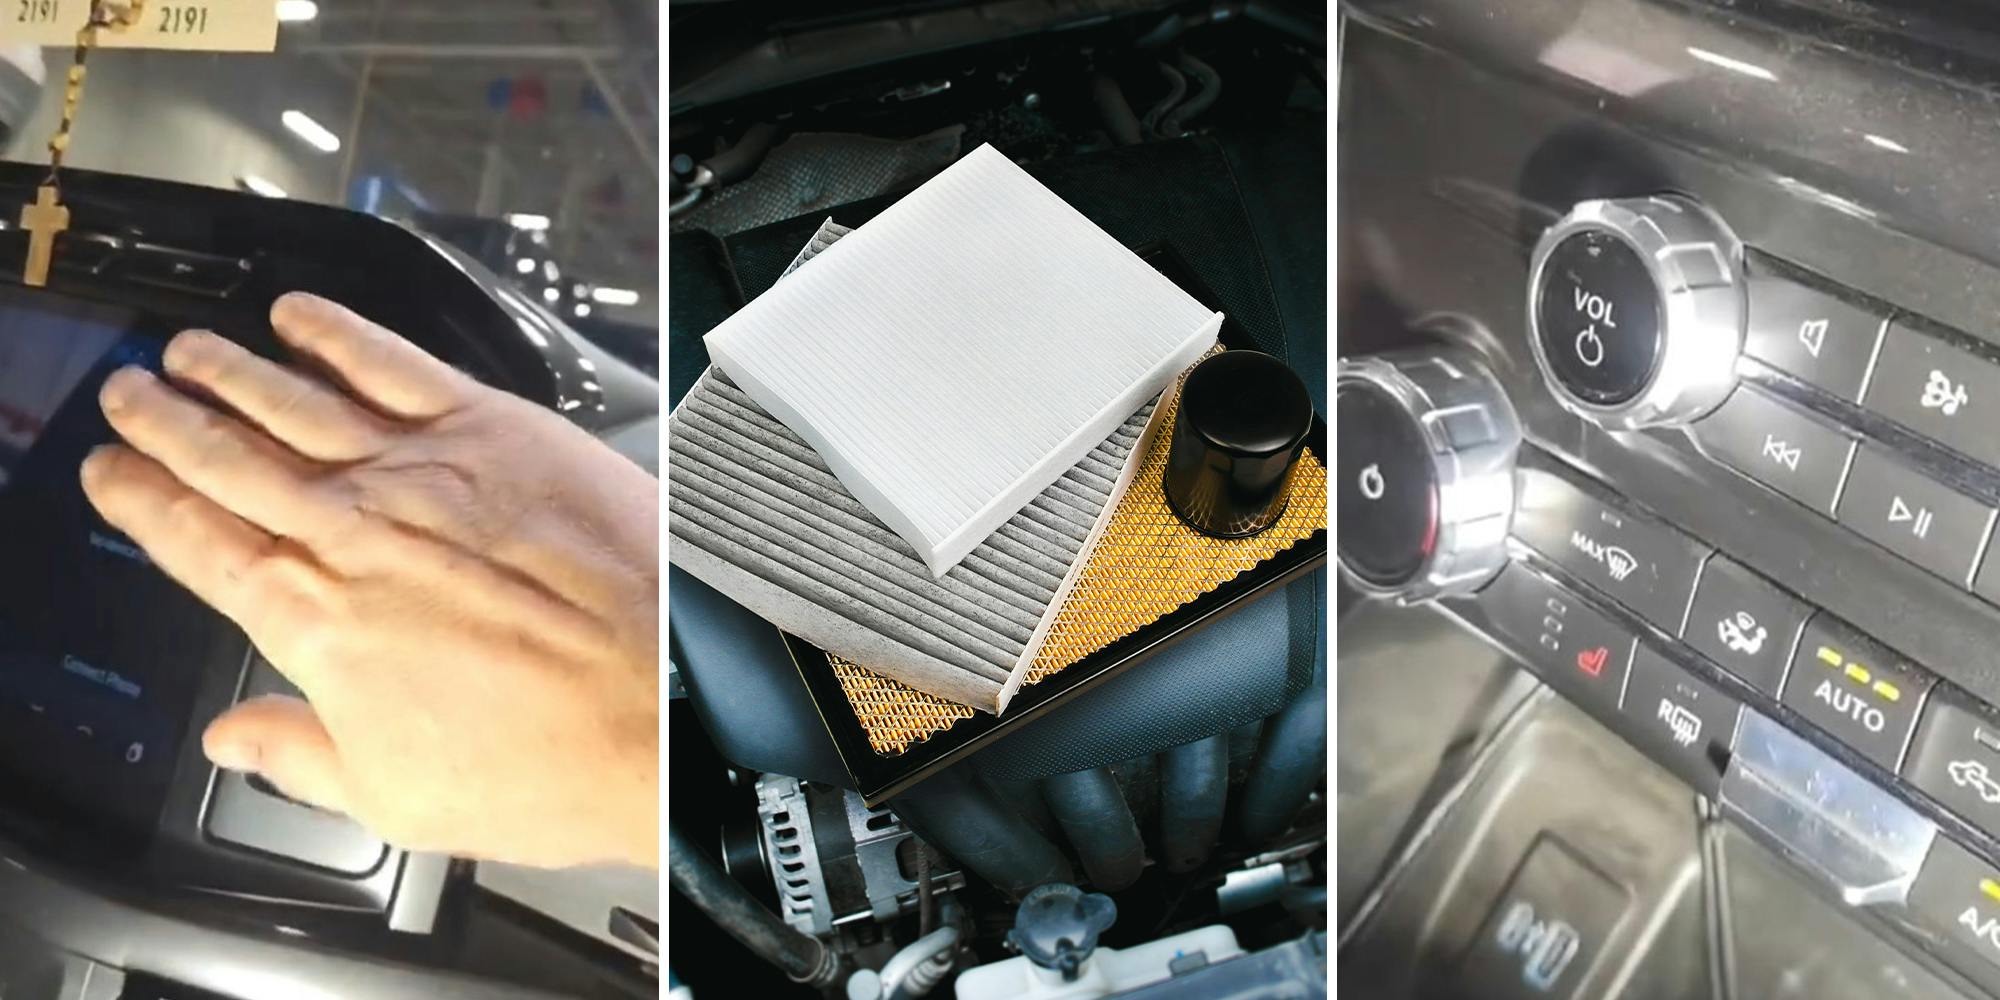 ‘And people wonder why mechanics aren’t trusted’: Mechanic gets revenge on customer who didn’t want cabin filter replaced 